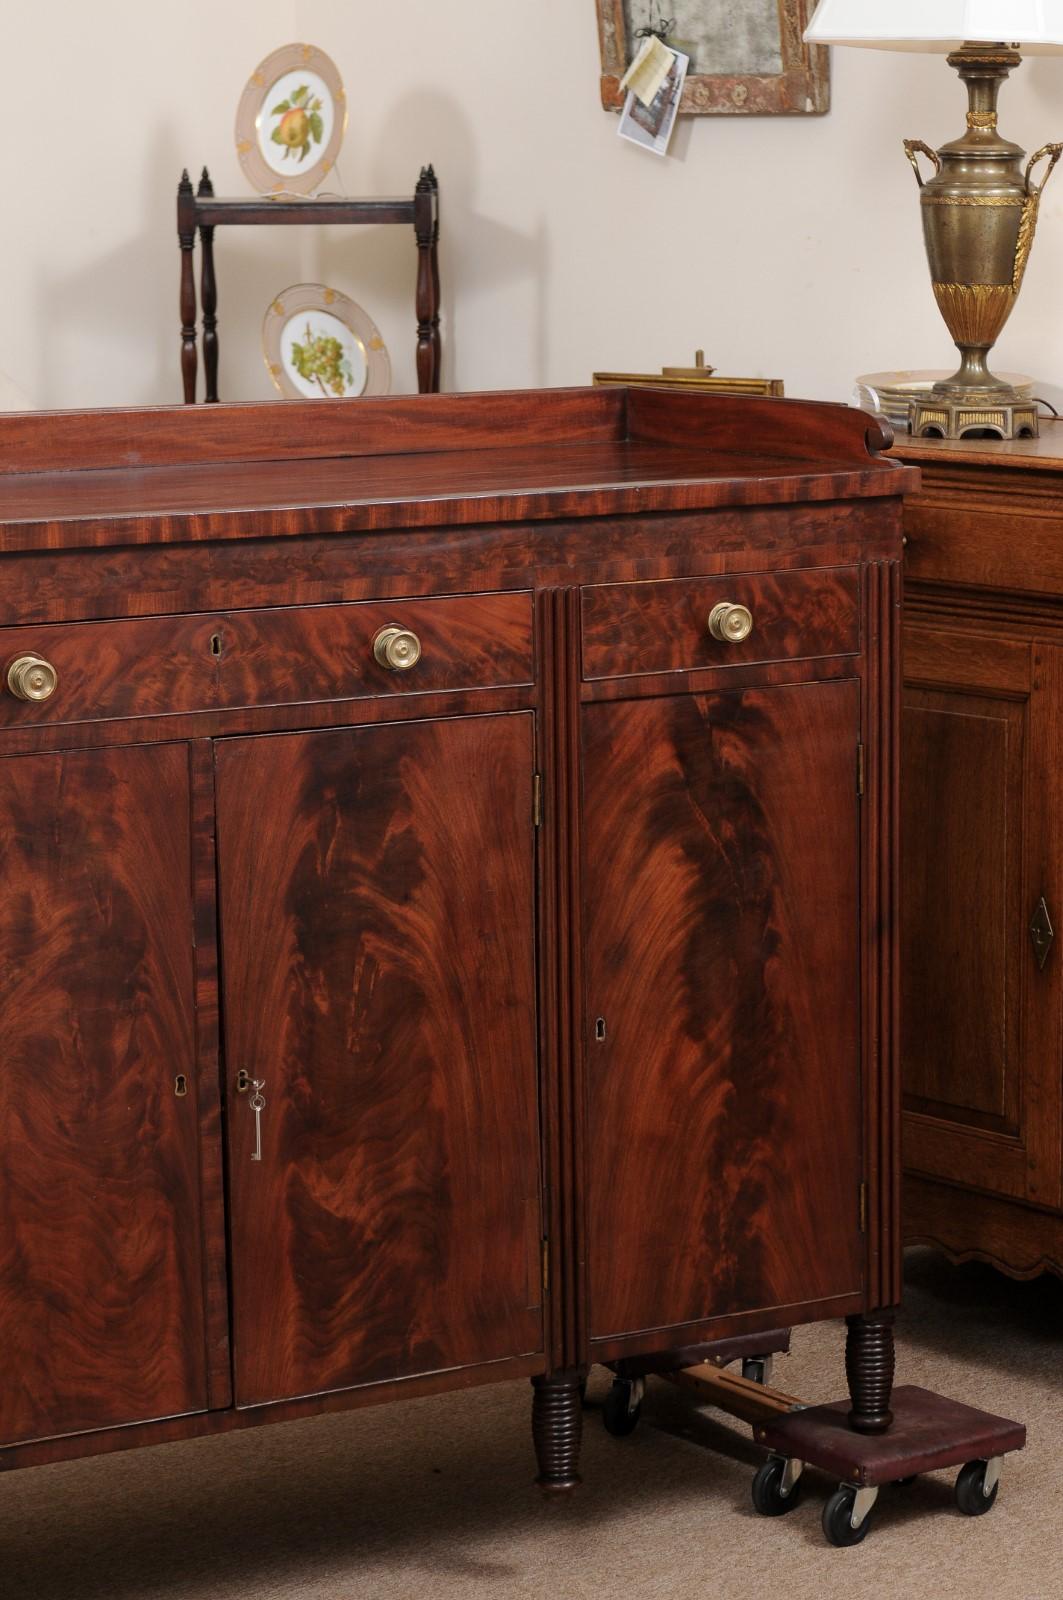 19th Century American Sheraton Sideboard in Mahogany with 4 Cabinet Doors 13